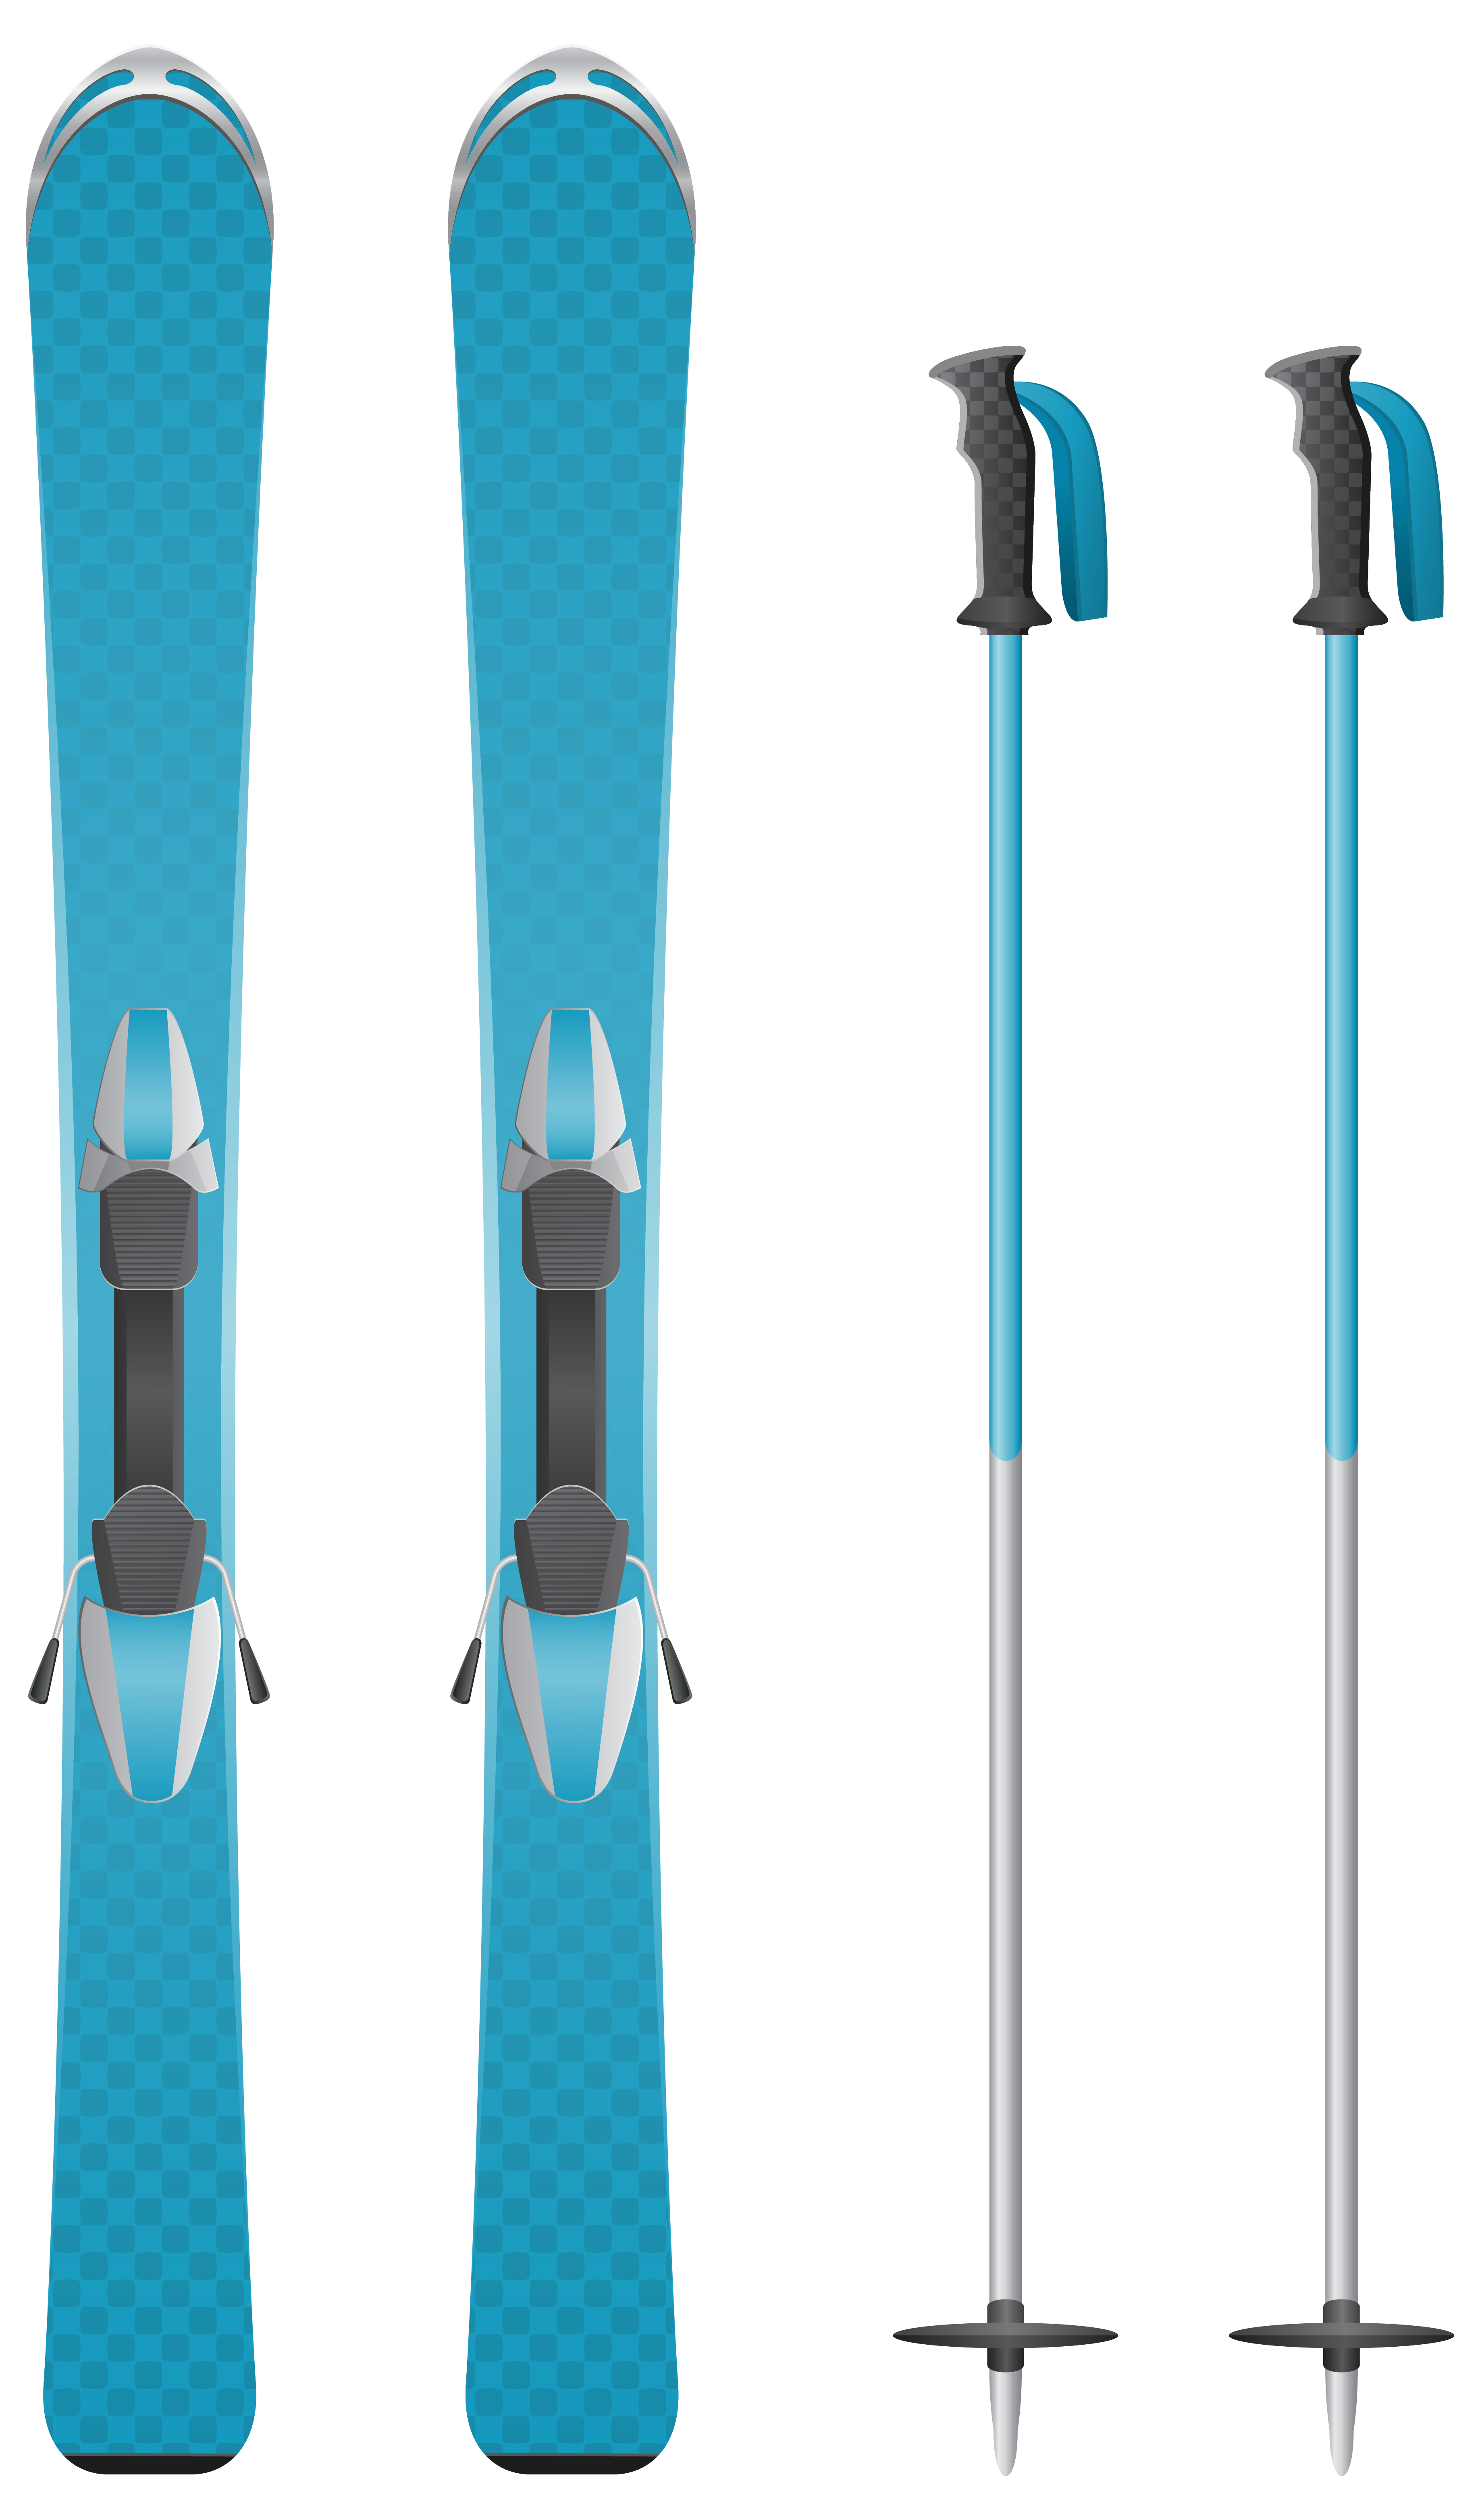 Skis clipart - Clipground